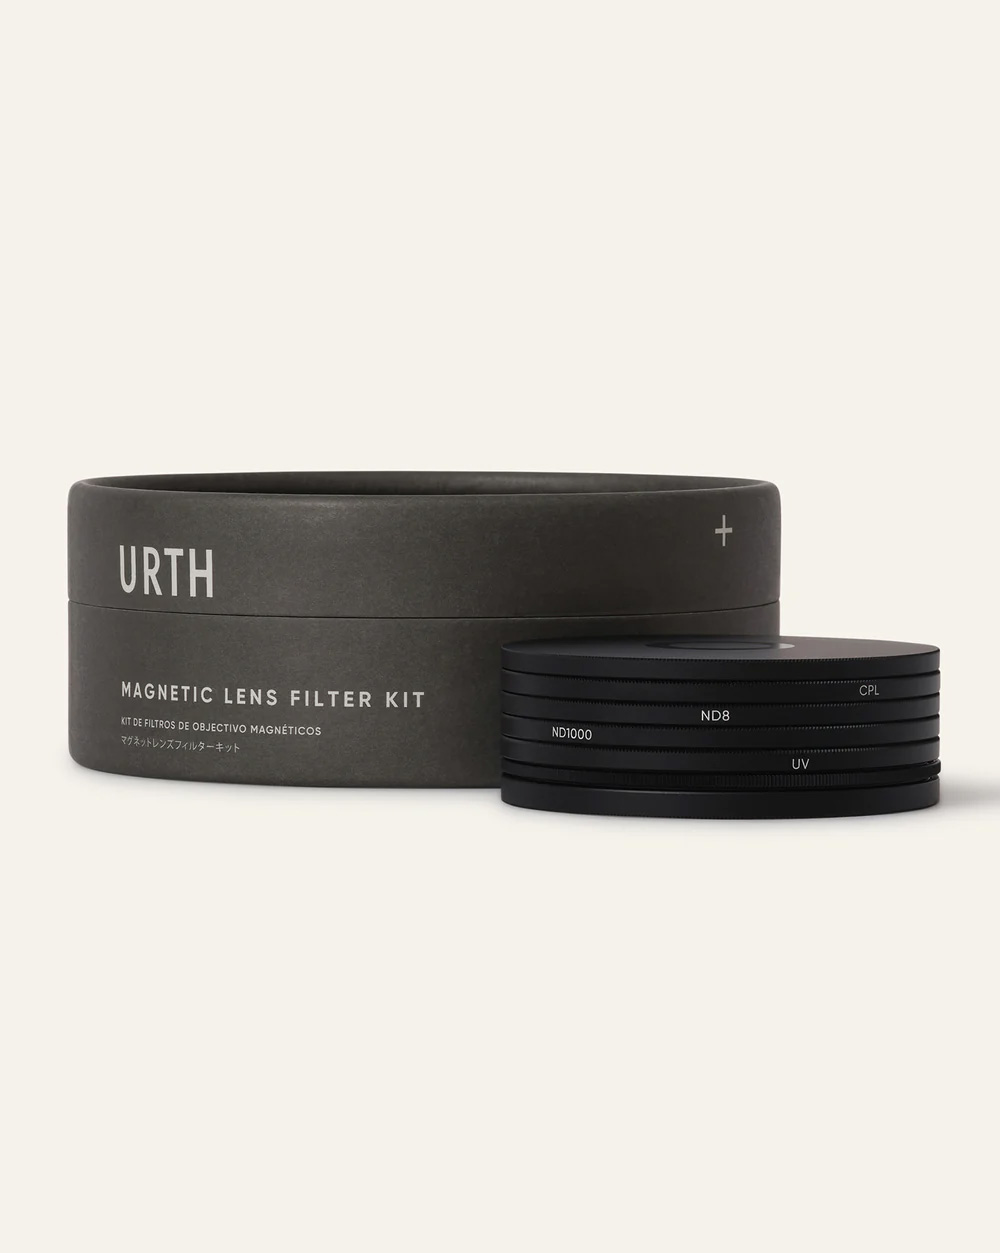 Urth Magnetic Essentials Filter Kit Plus+ (77mm) 4 Filter Kit (UV, CPL, ND8 and ND1000)